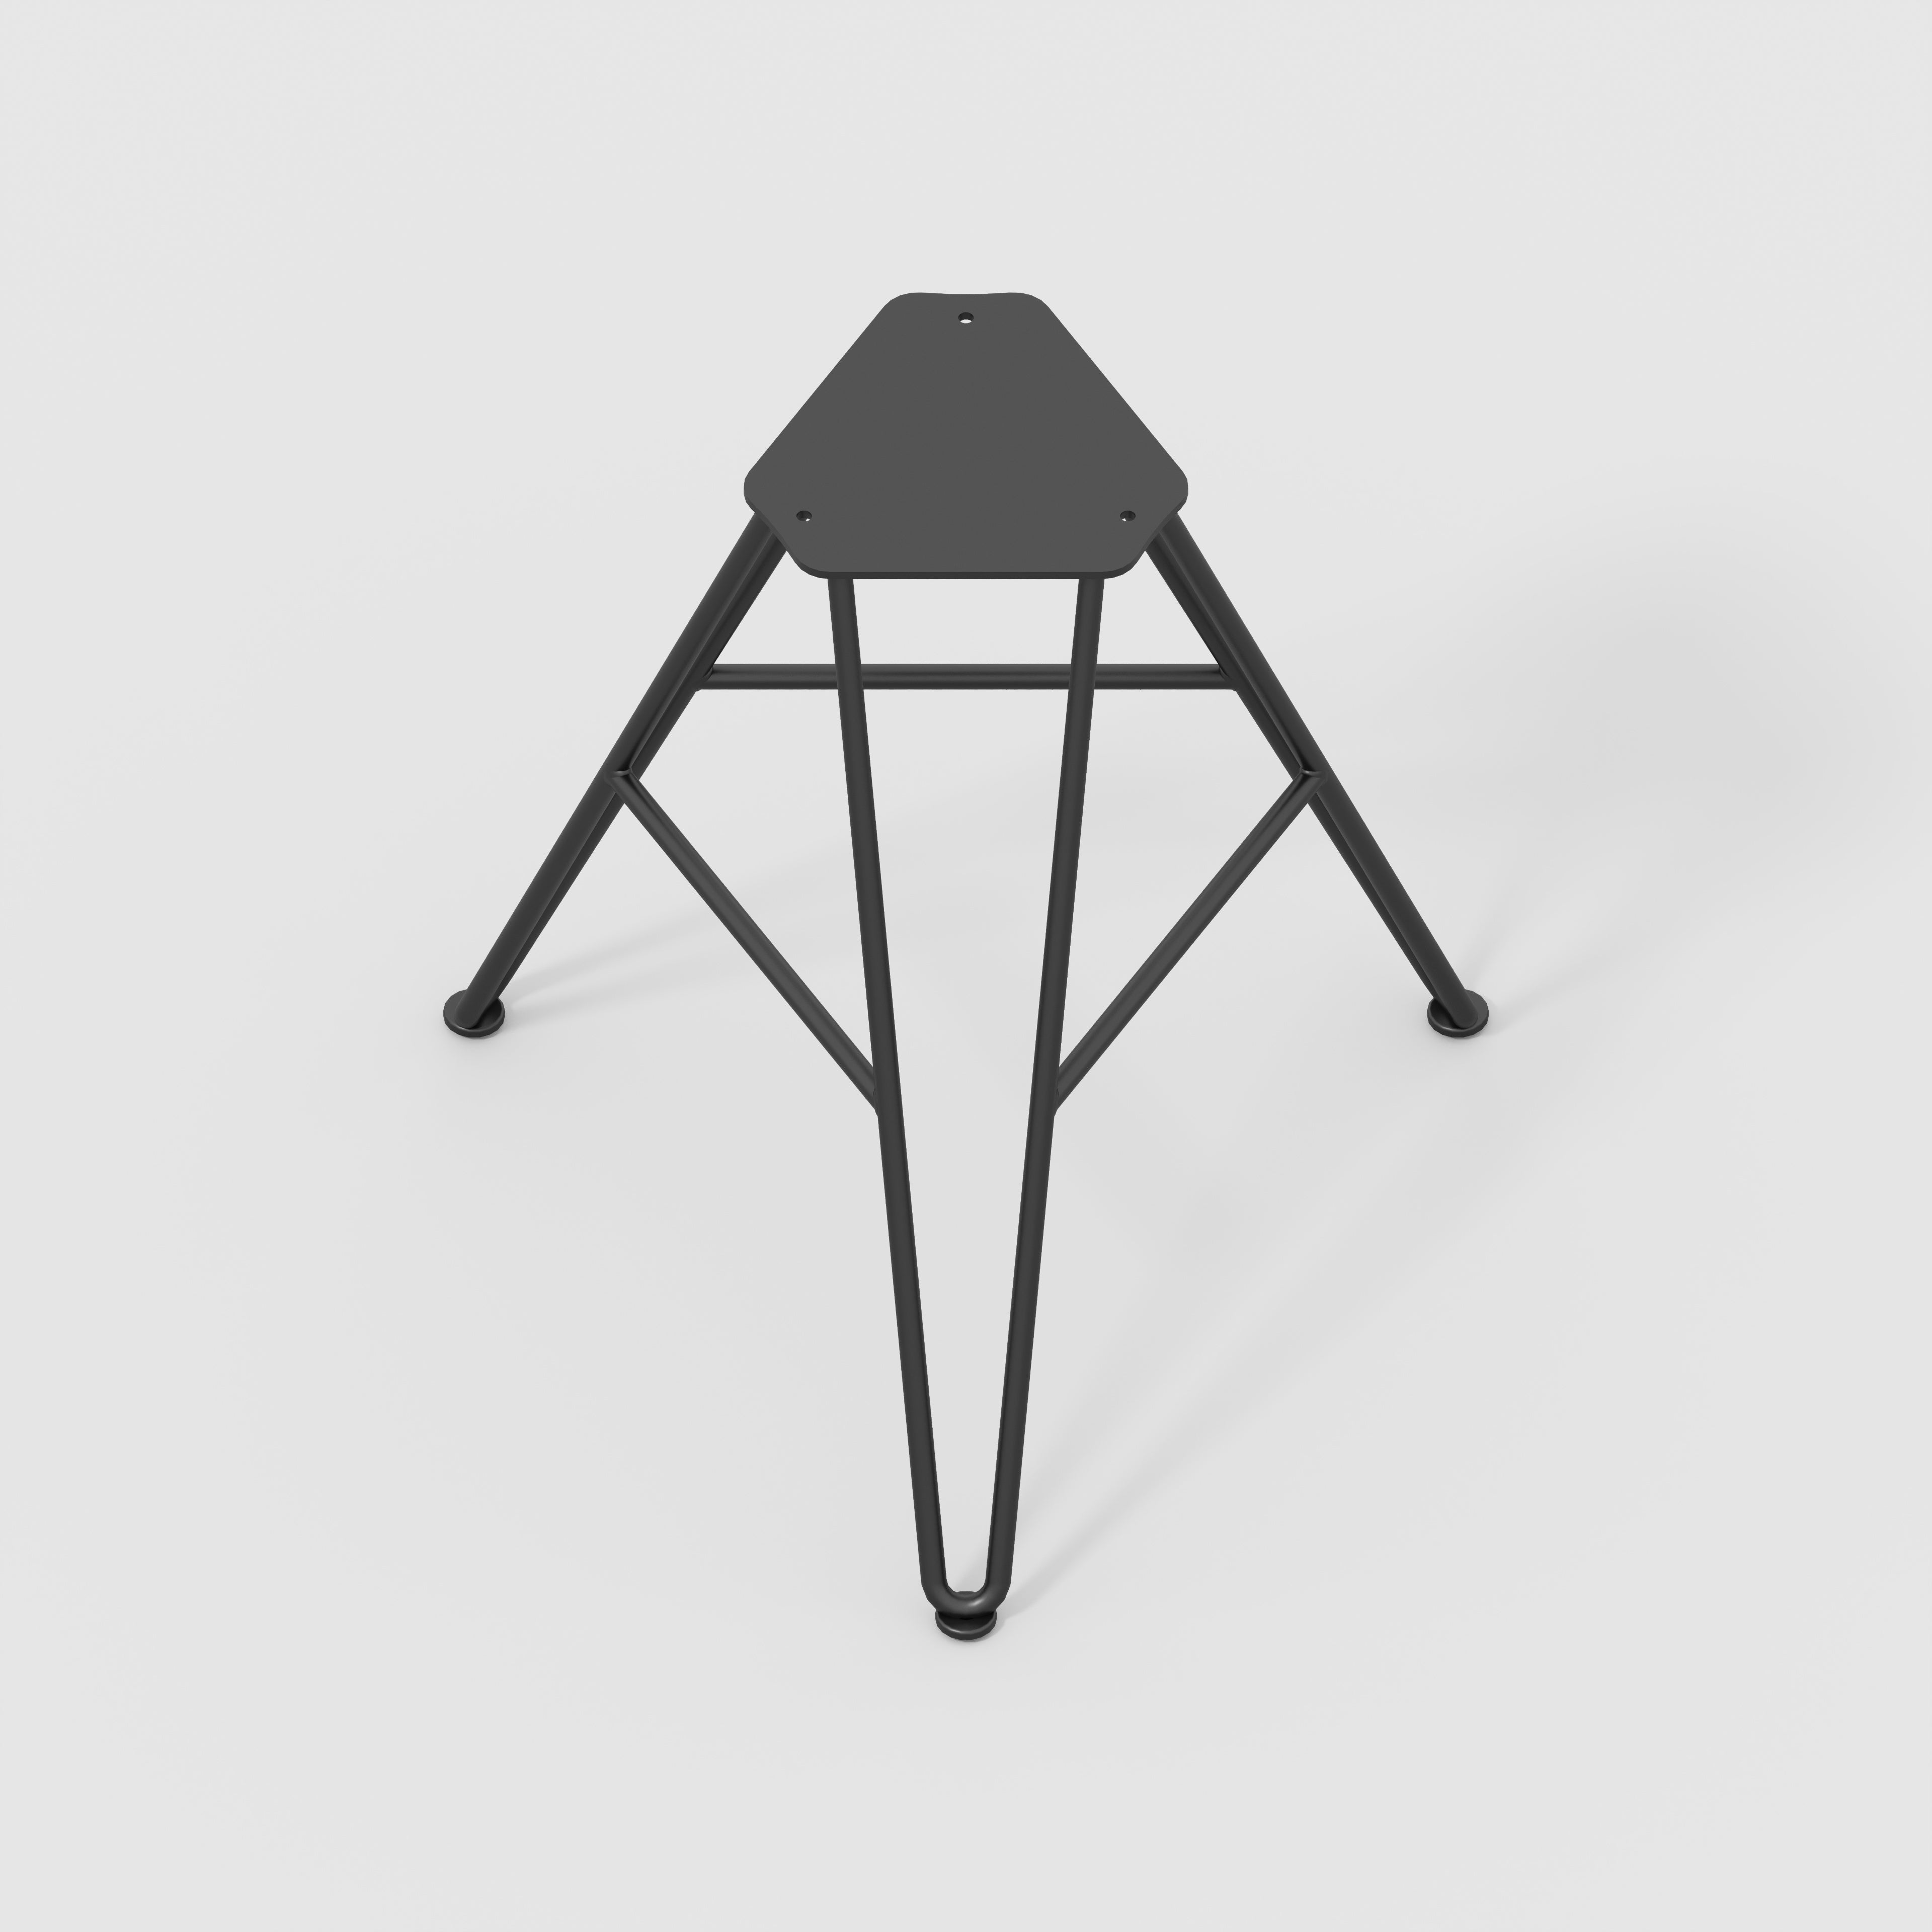 Stool with Black Hairpin Base - Formica Diamond Black